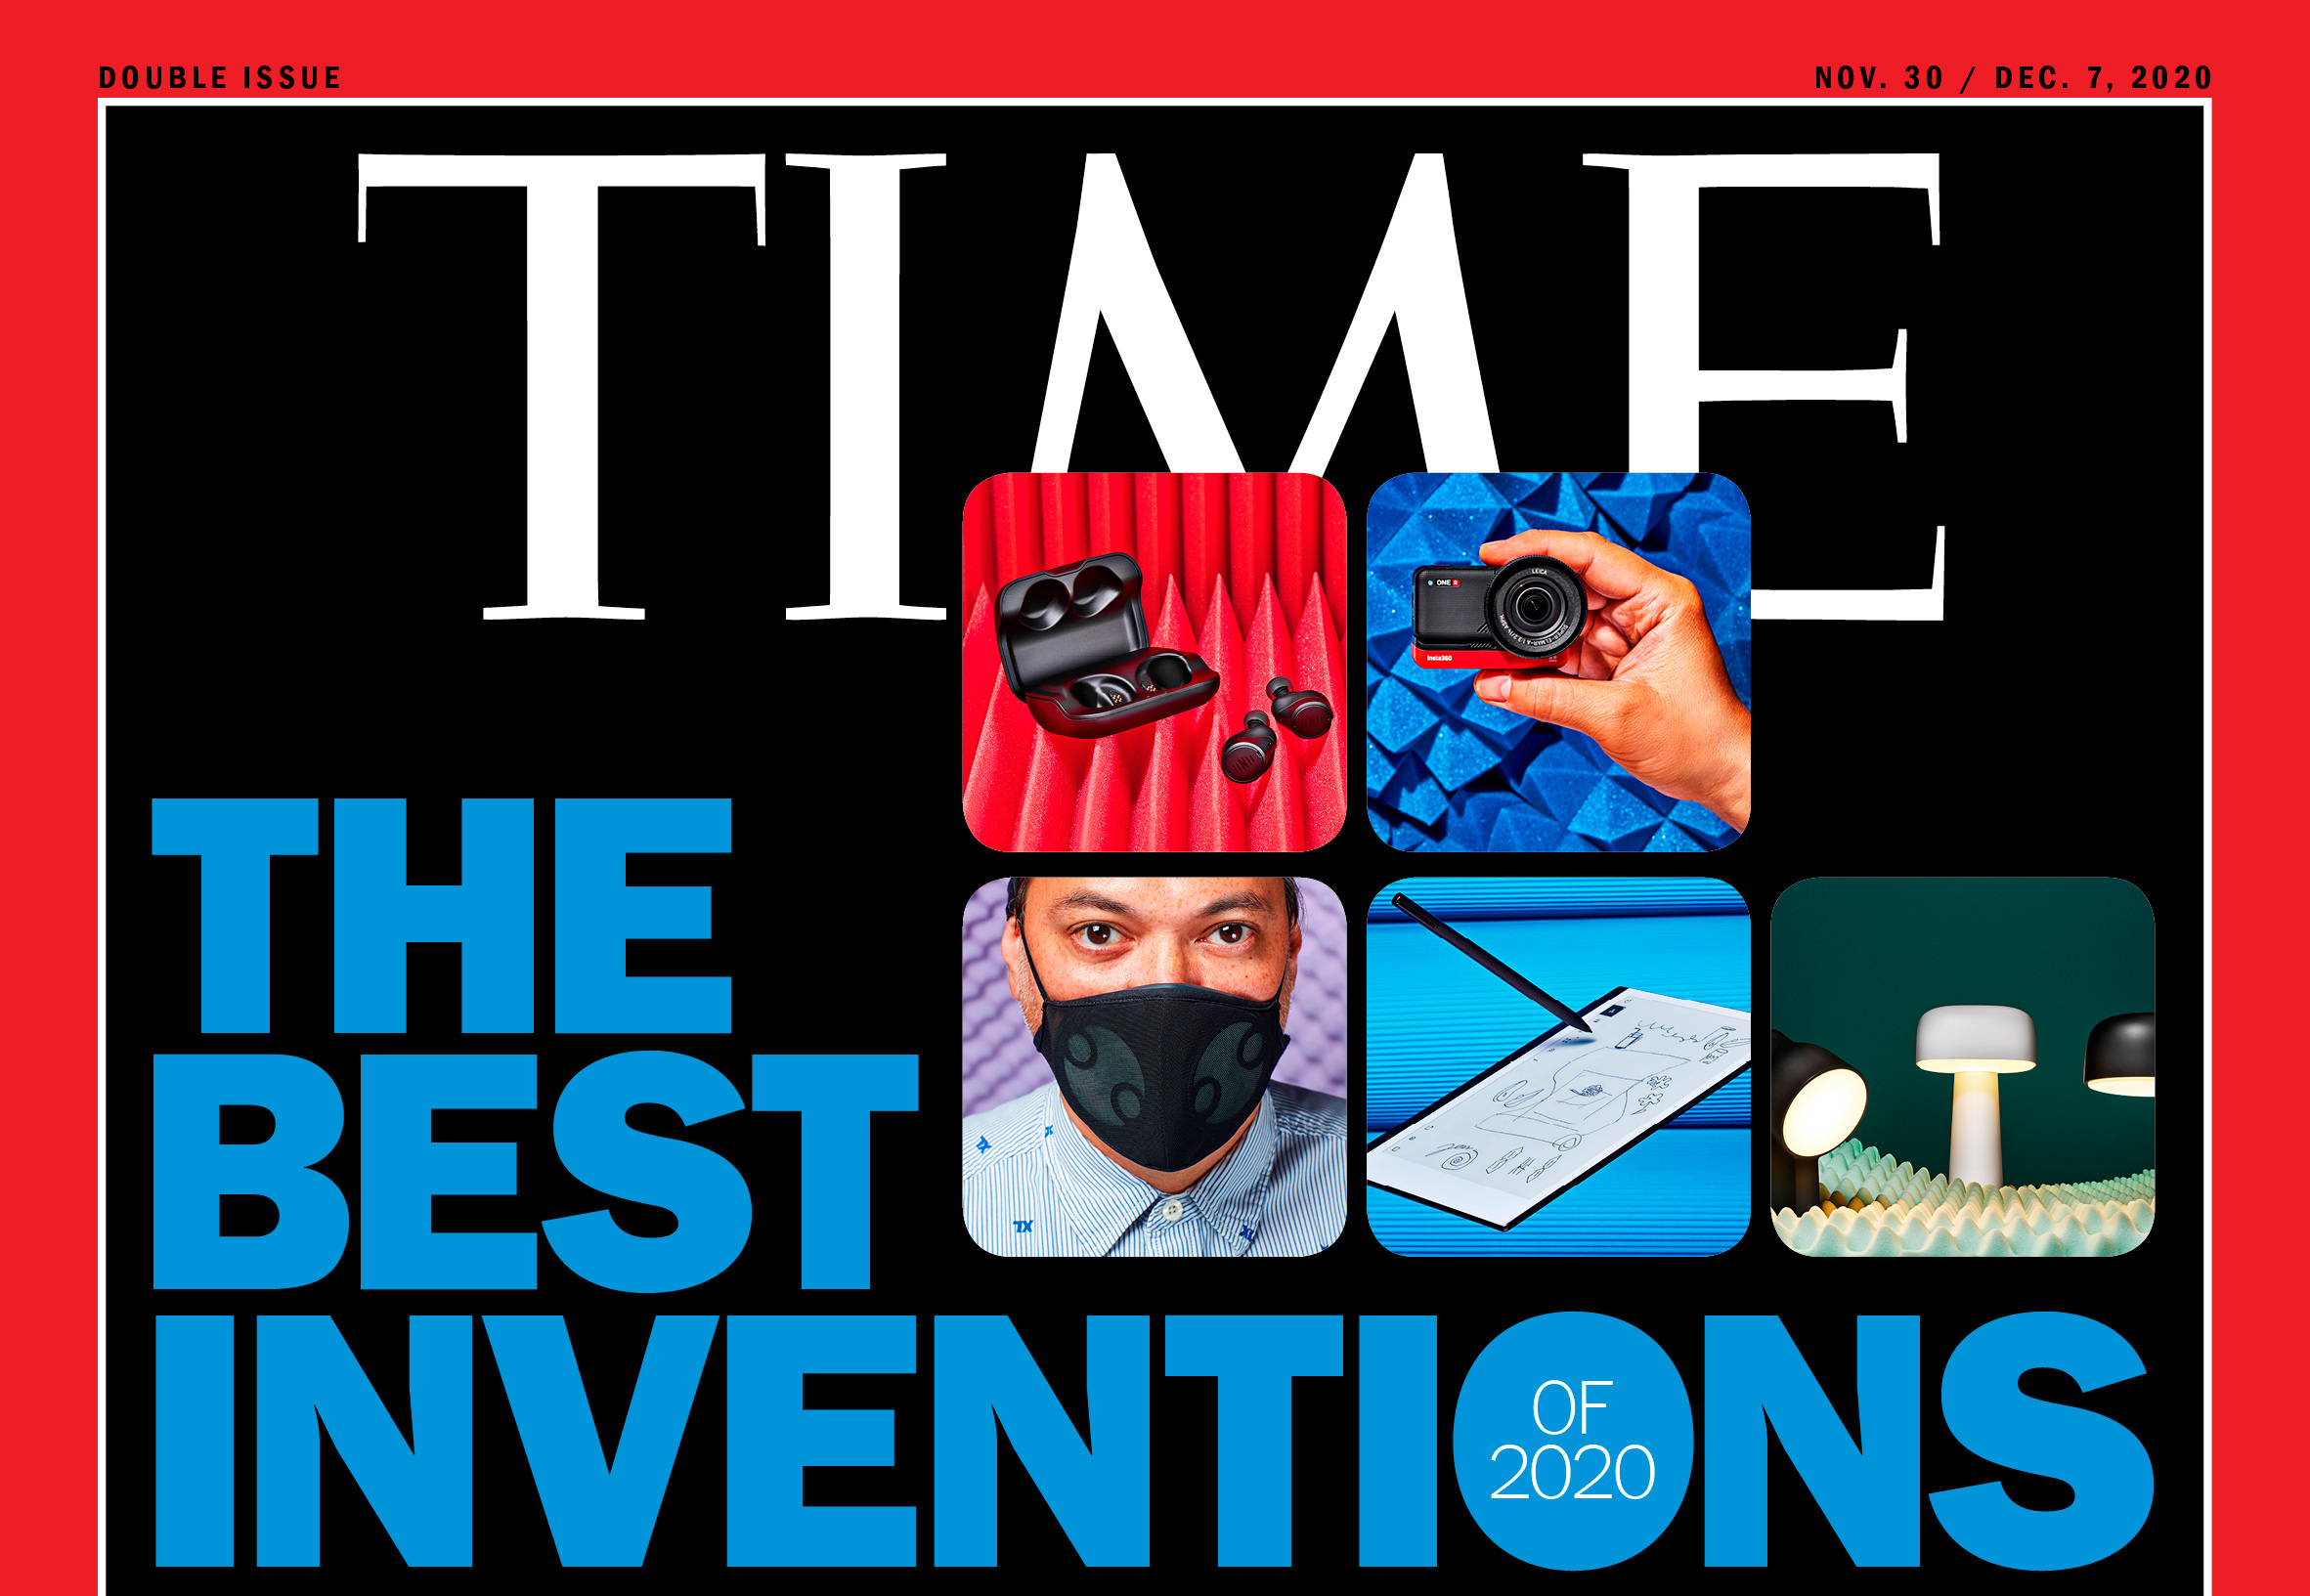 LUCI Named to TIME’s List of the 100 Best Inventions of 2020